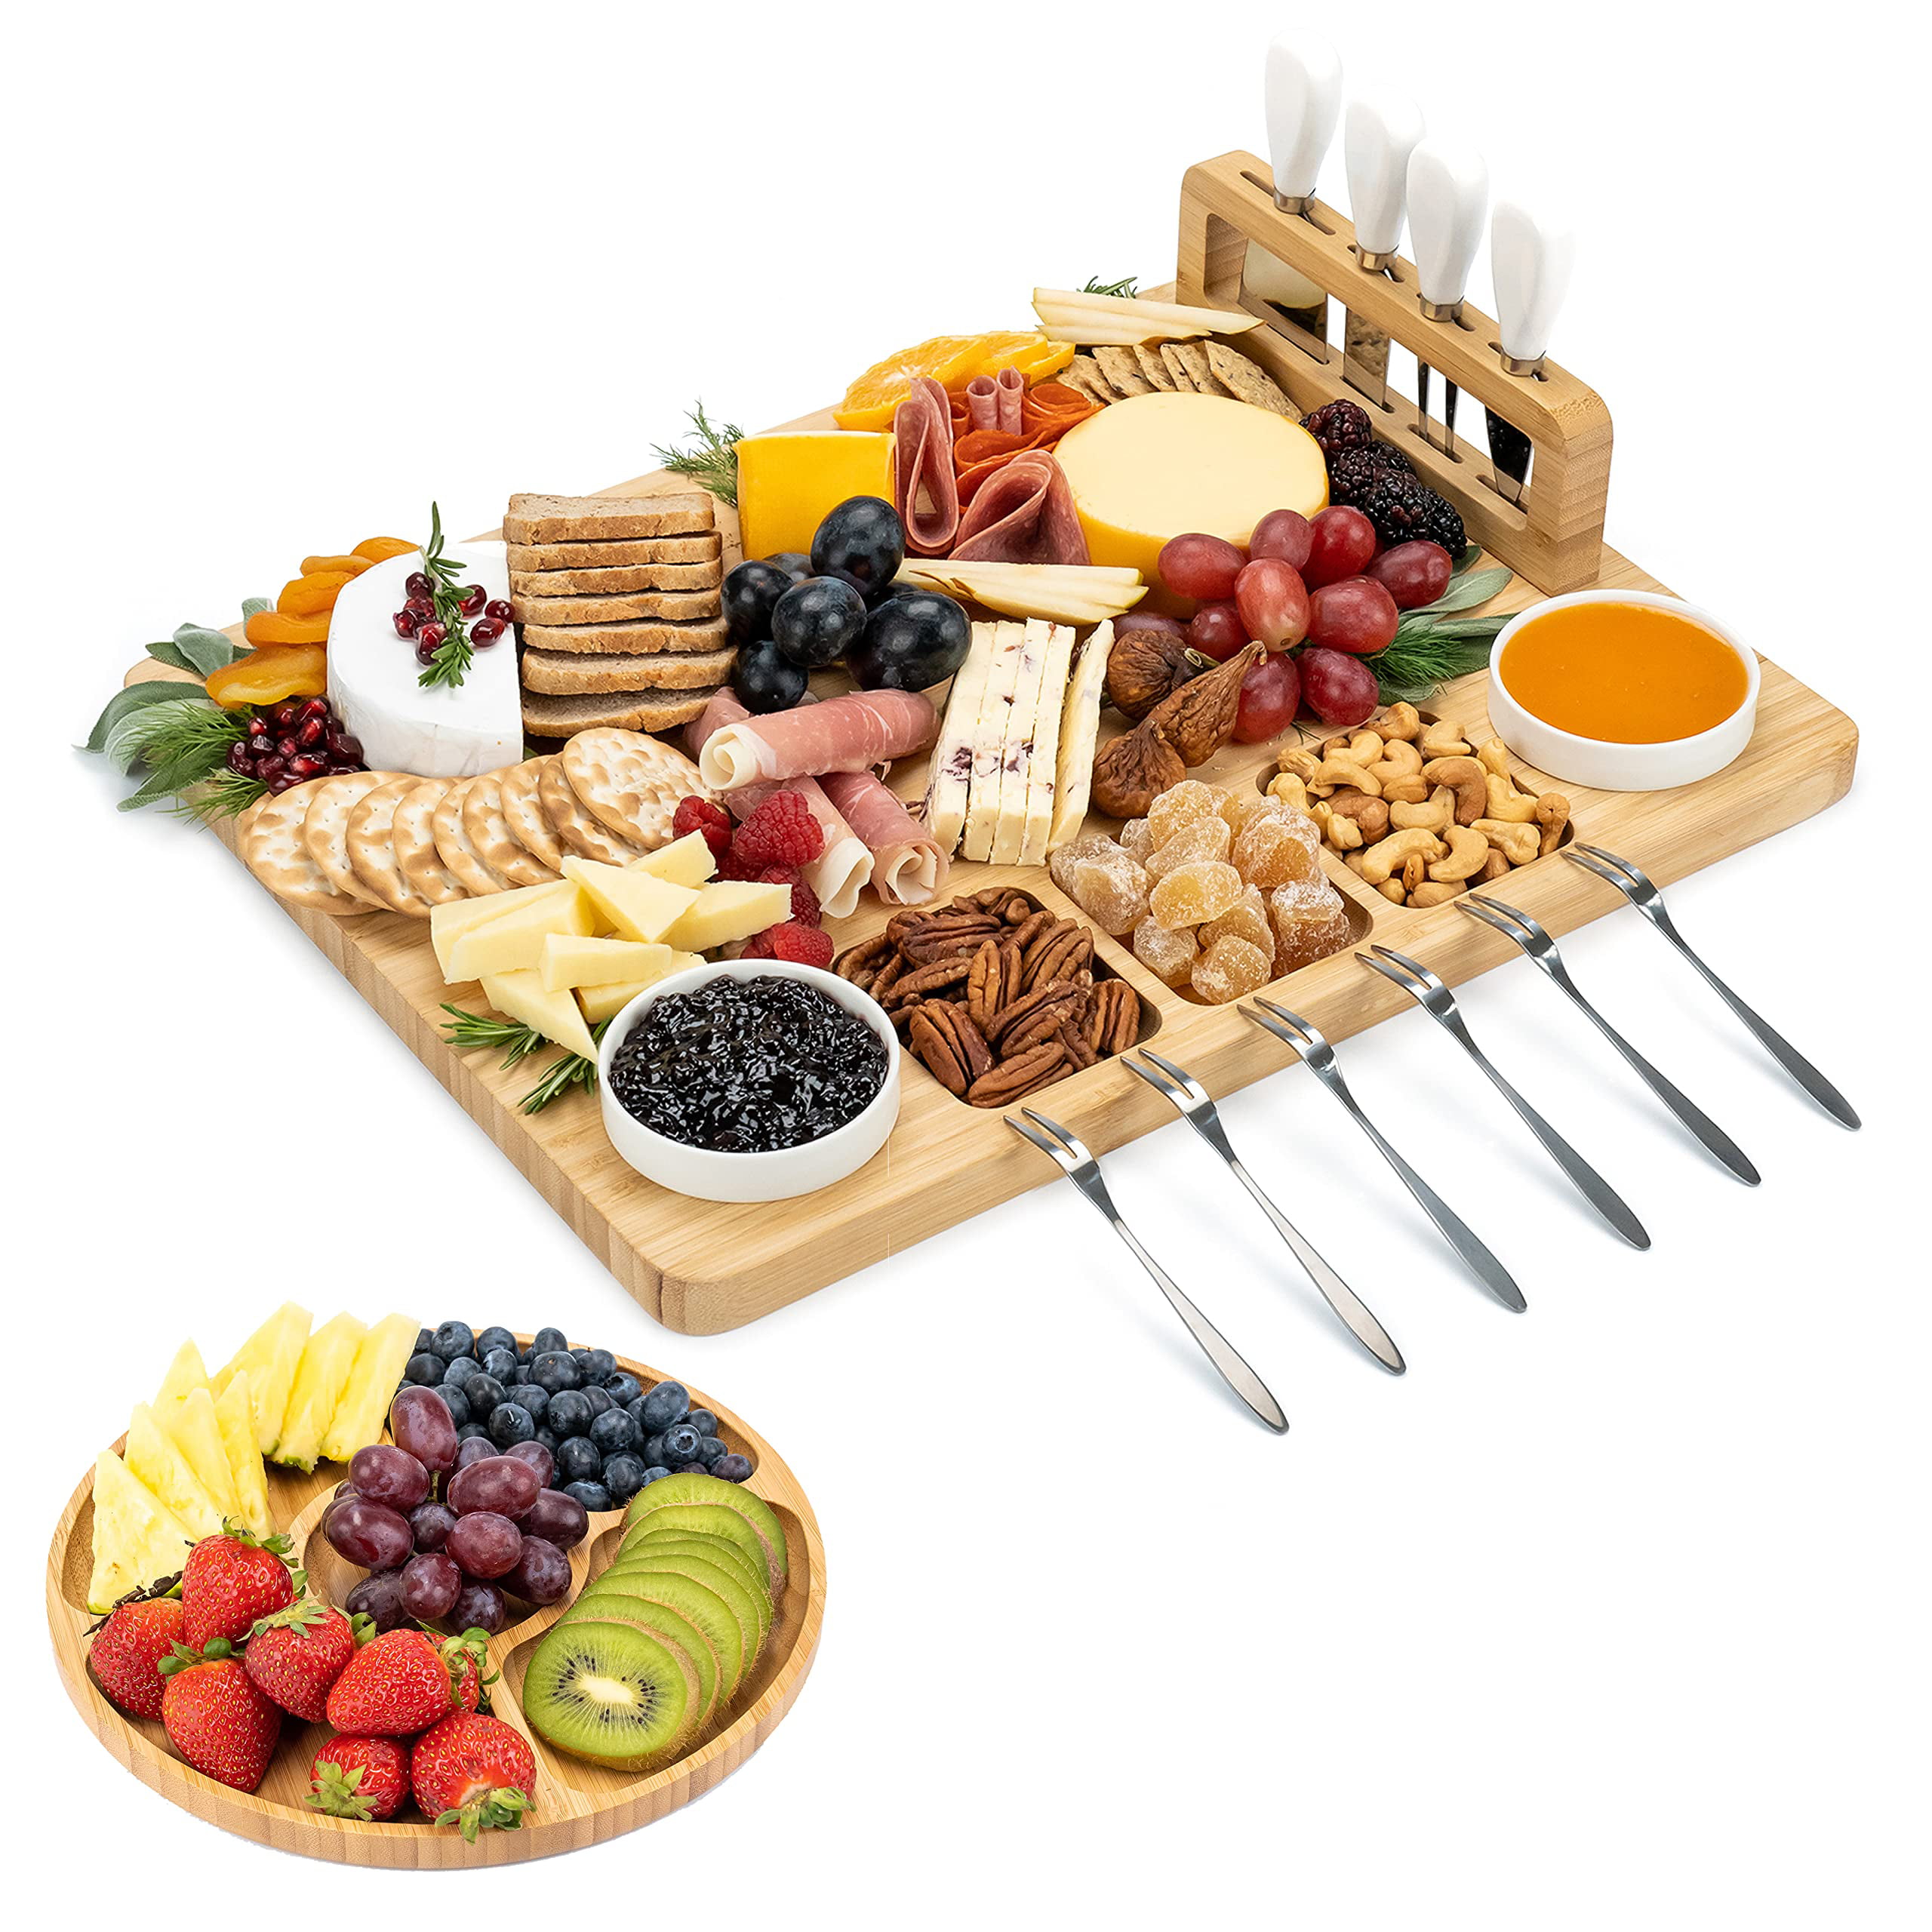 Round Cheese Board Set Wooden Charcuterie Meat Platter Serving Tray With Knifes Fork Cutlery 